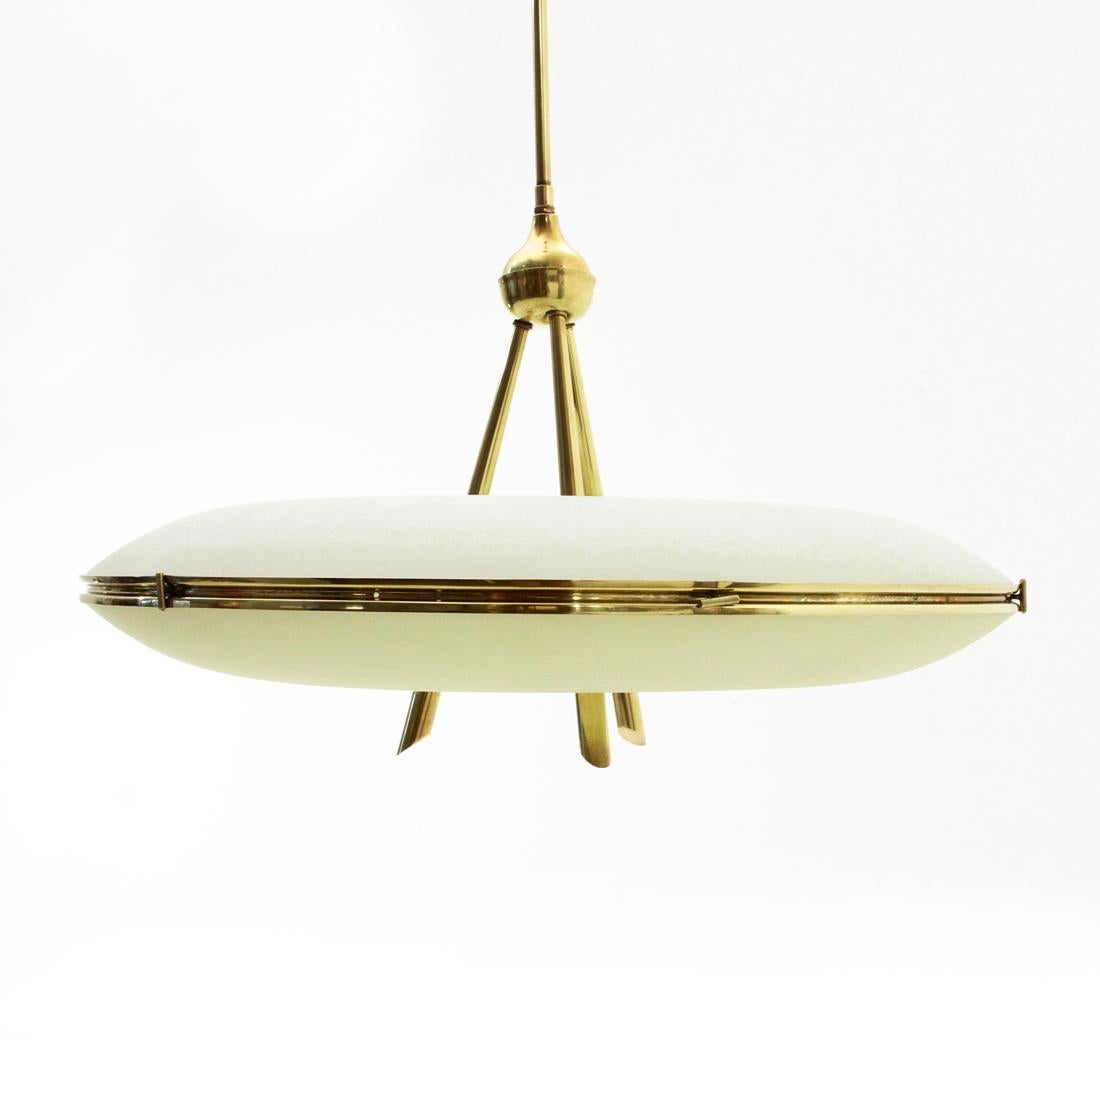 Italian-made chandelier produced in the 1950s.
Rosette, stem and body in brass.
Double sandblasted diffuser in curved white and yellow glass.
Good general condition, some signs due to normal use of time, glass whit chipping where it rests on the